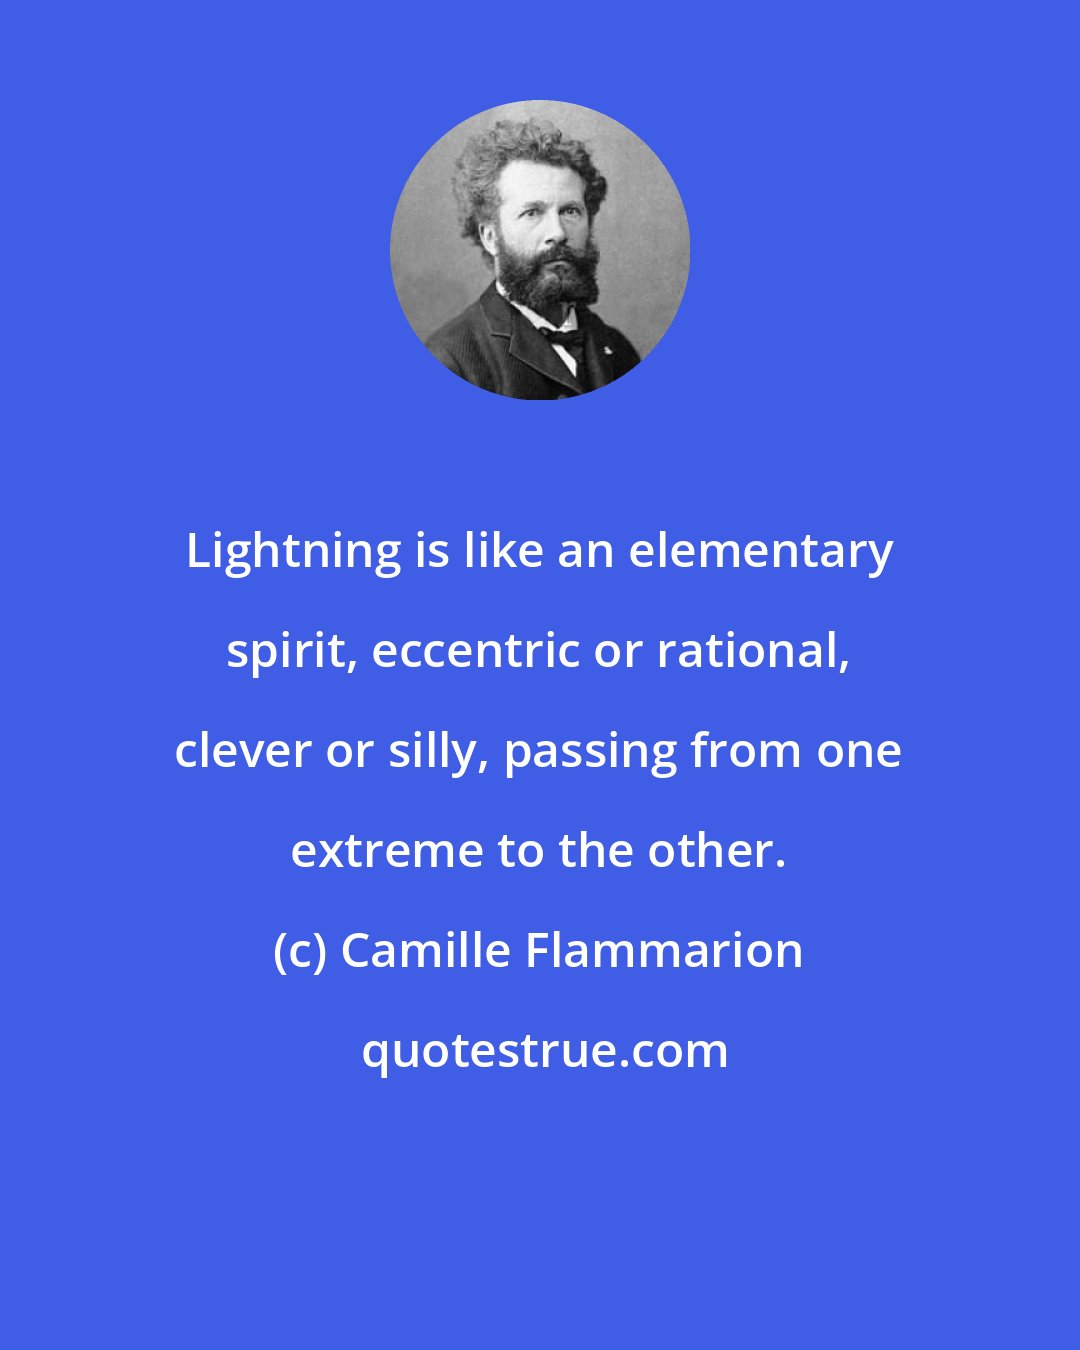 Camille Flammarion: Lightning is like an elementary spirit, eccentric or rational, clever or silly, passing from one extreme to the other.